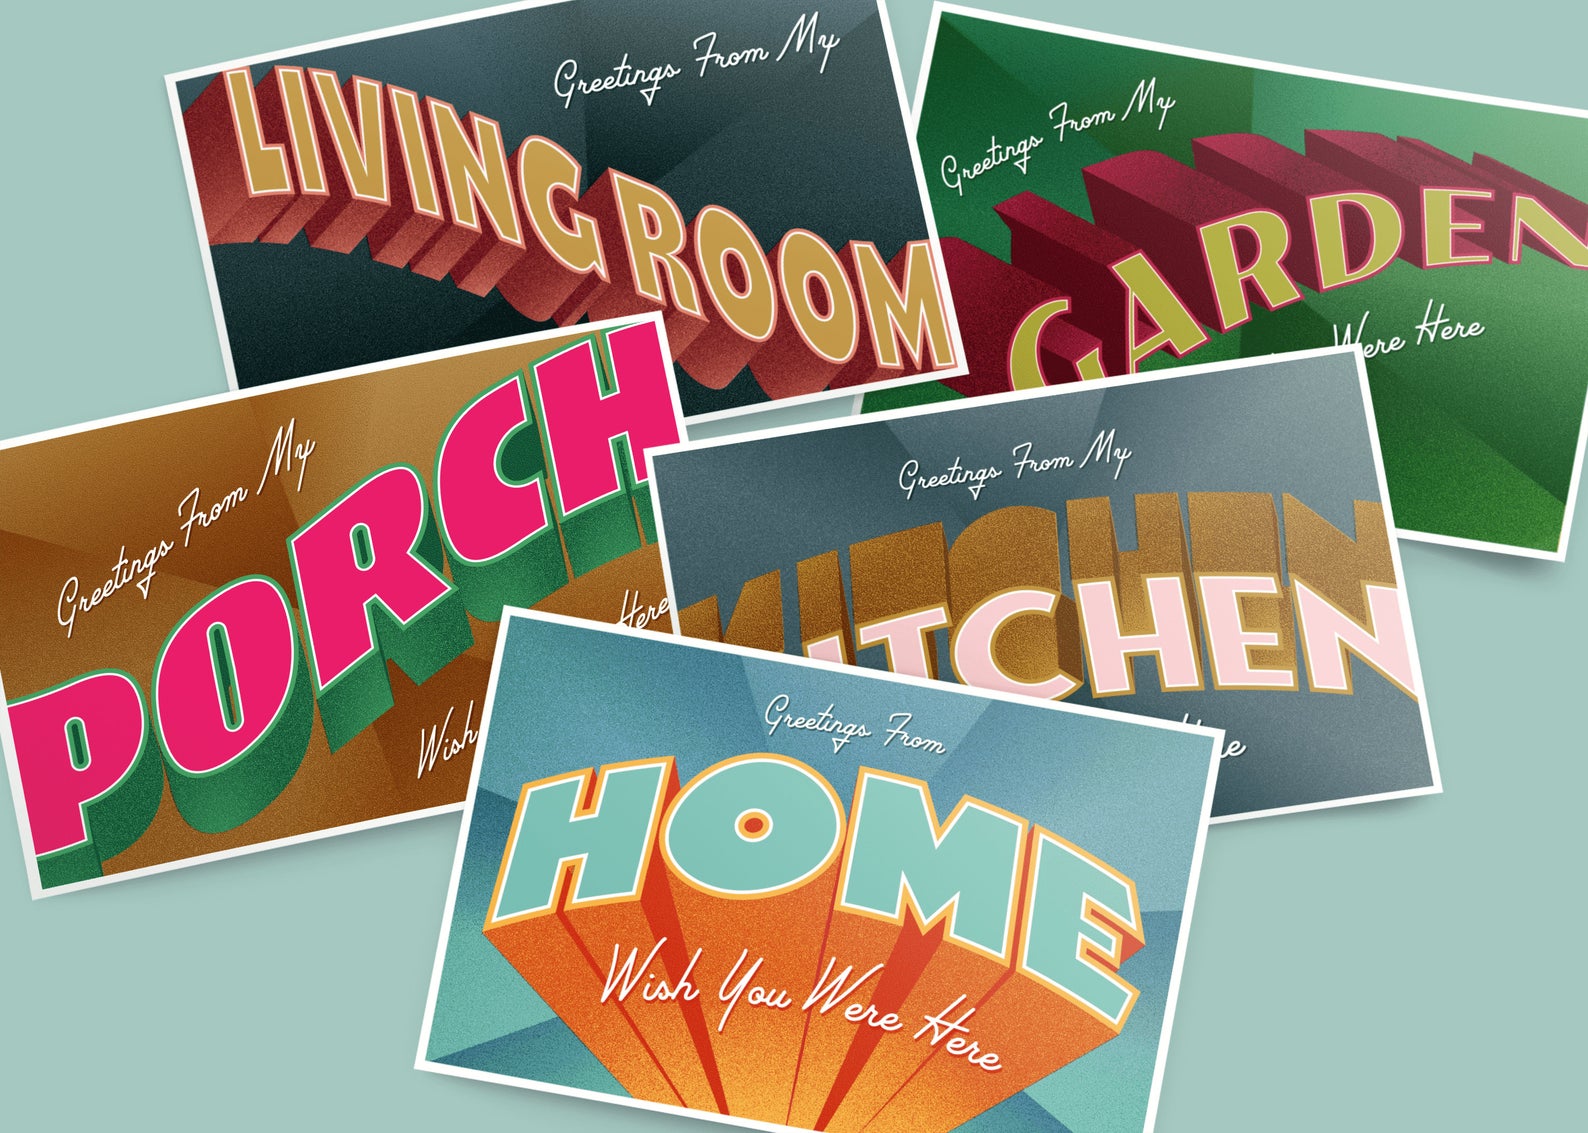 Vintage style postcards, five total, with the following home locations: living room, garden, porch, kitchen, home